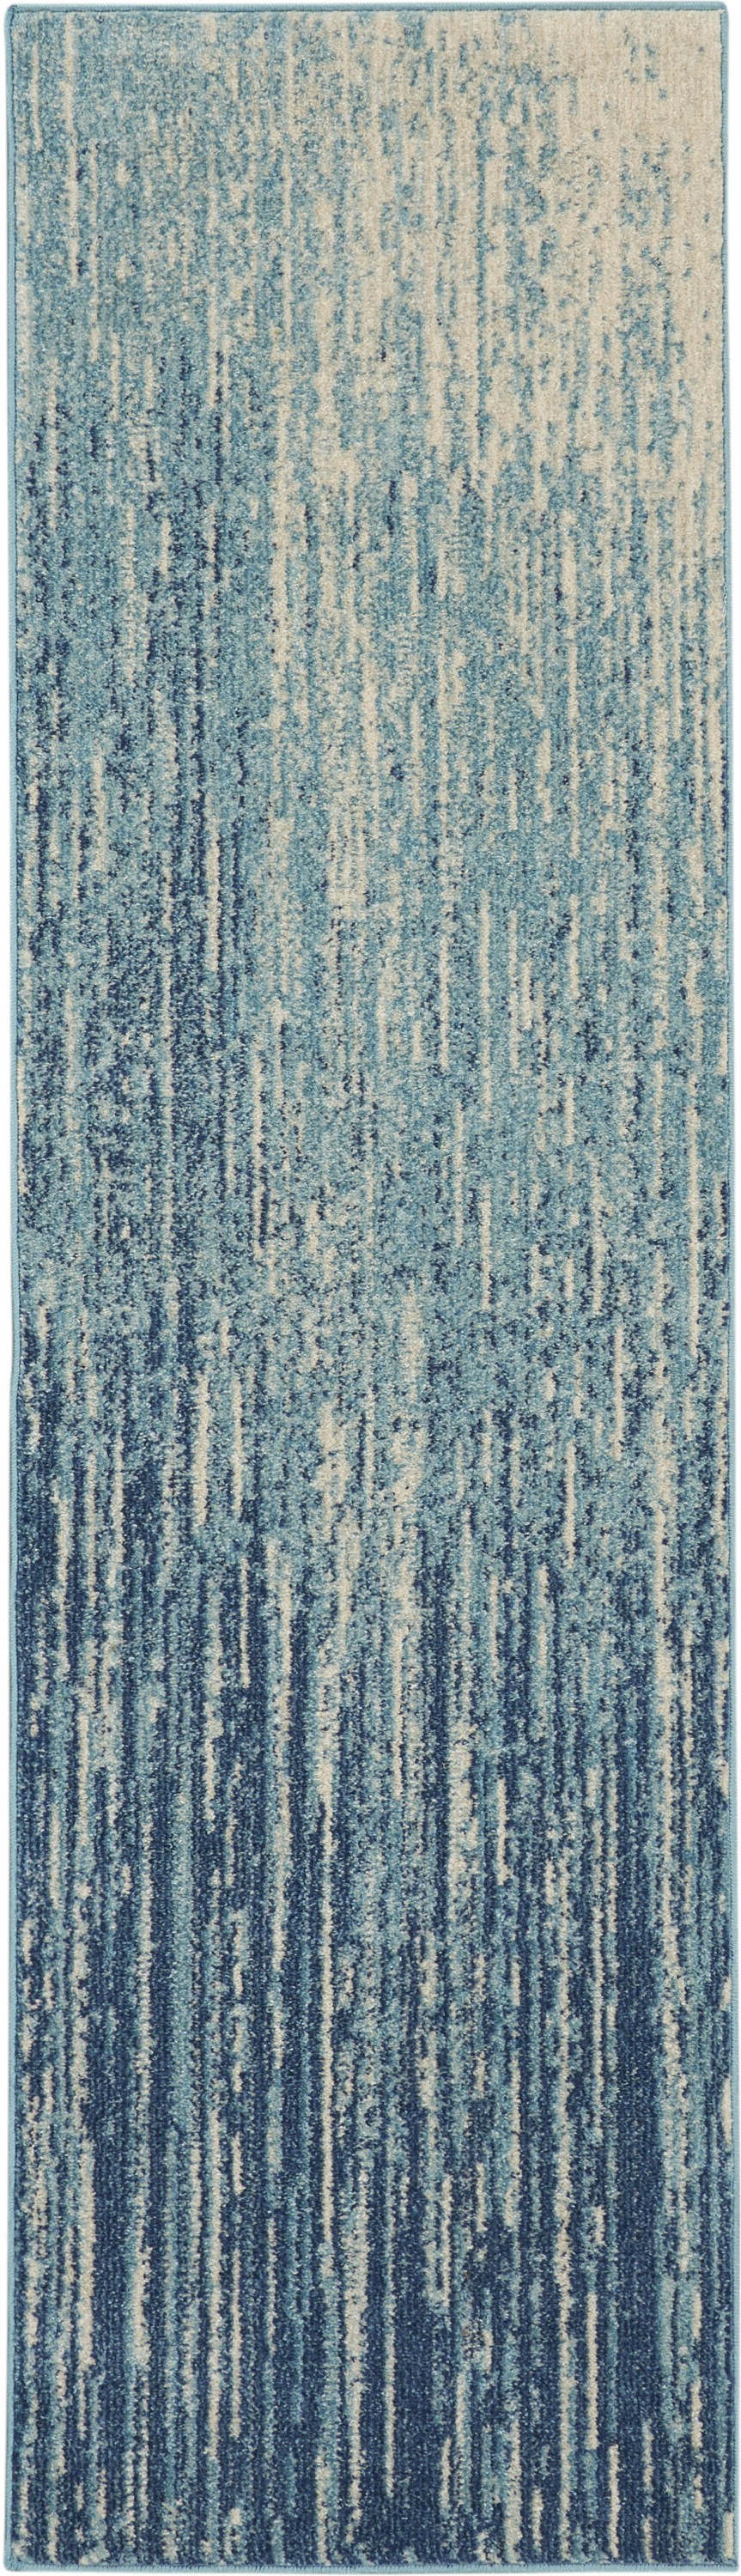 6' Ivory And Blue Abstract Power Loom Runner Rug-385279-1